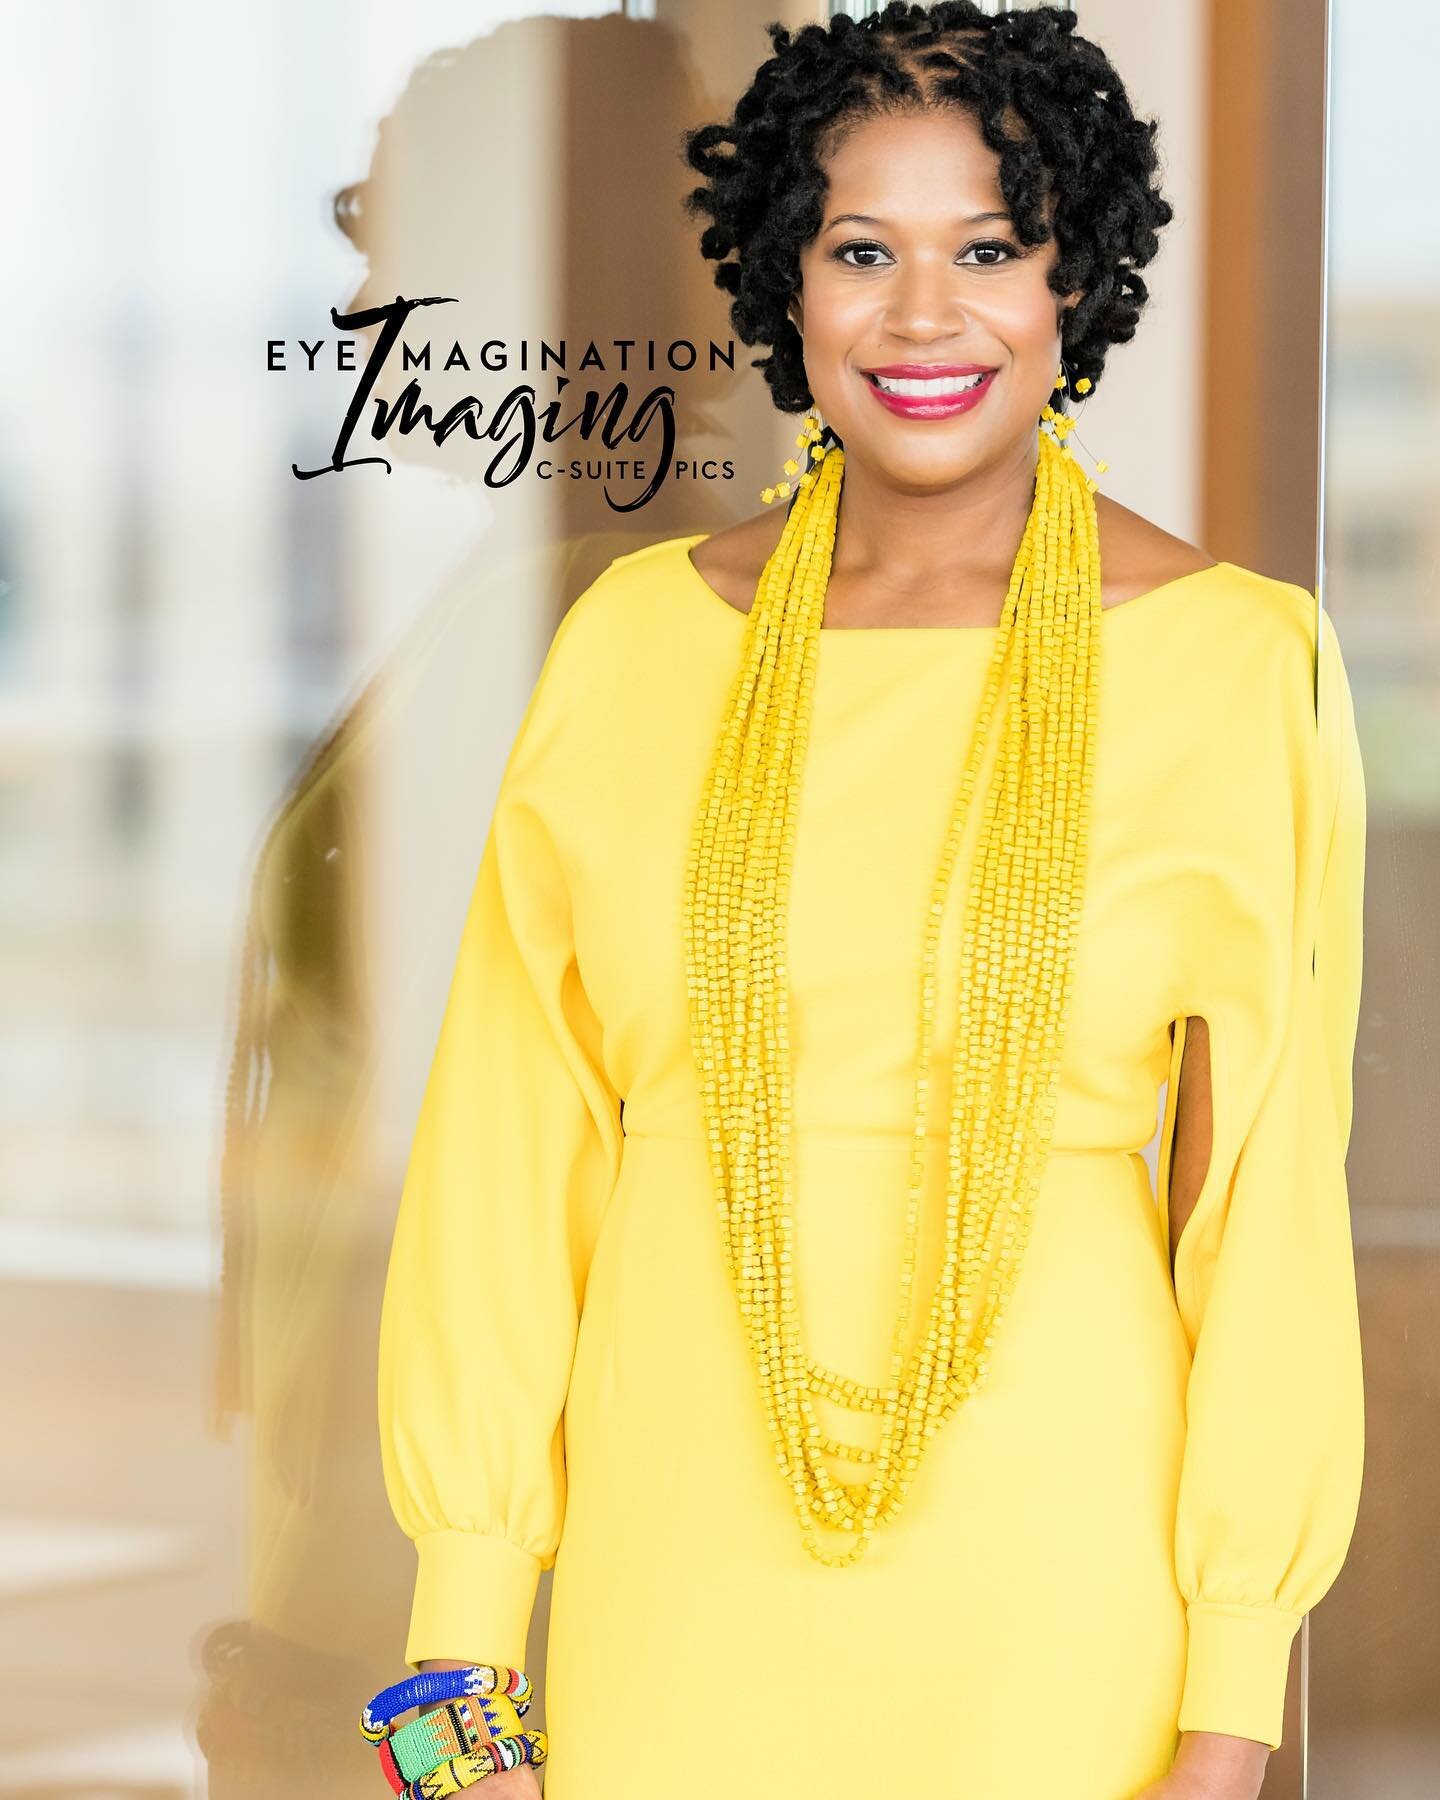 #SNEAKPEEK!

#CSuiteChick DOCTOR @jd_sims did not come to play this weekend! She is #celebrating her #life and #health with beautiful, bold #color!! I struggled with what jewelry to pair with her gorgeous @gabunion dress (for @nyandcompany), but ulti